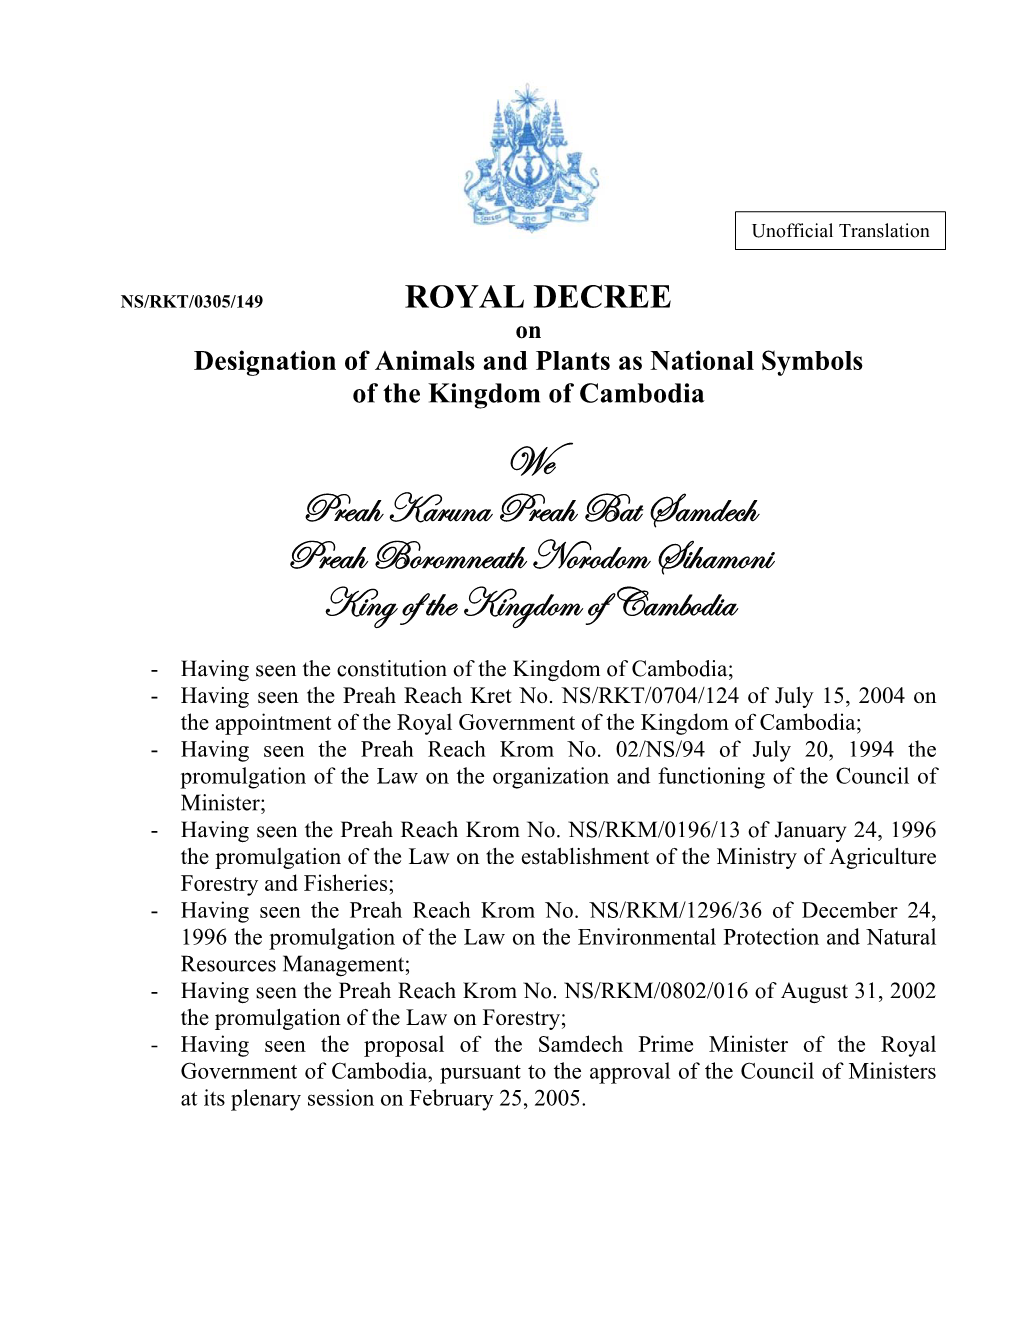 ROYAL DECREE on Designation of Animals and Plants As National Symbols of the Kingdom of Cambodia